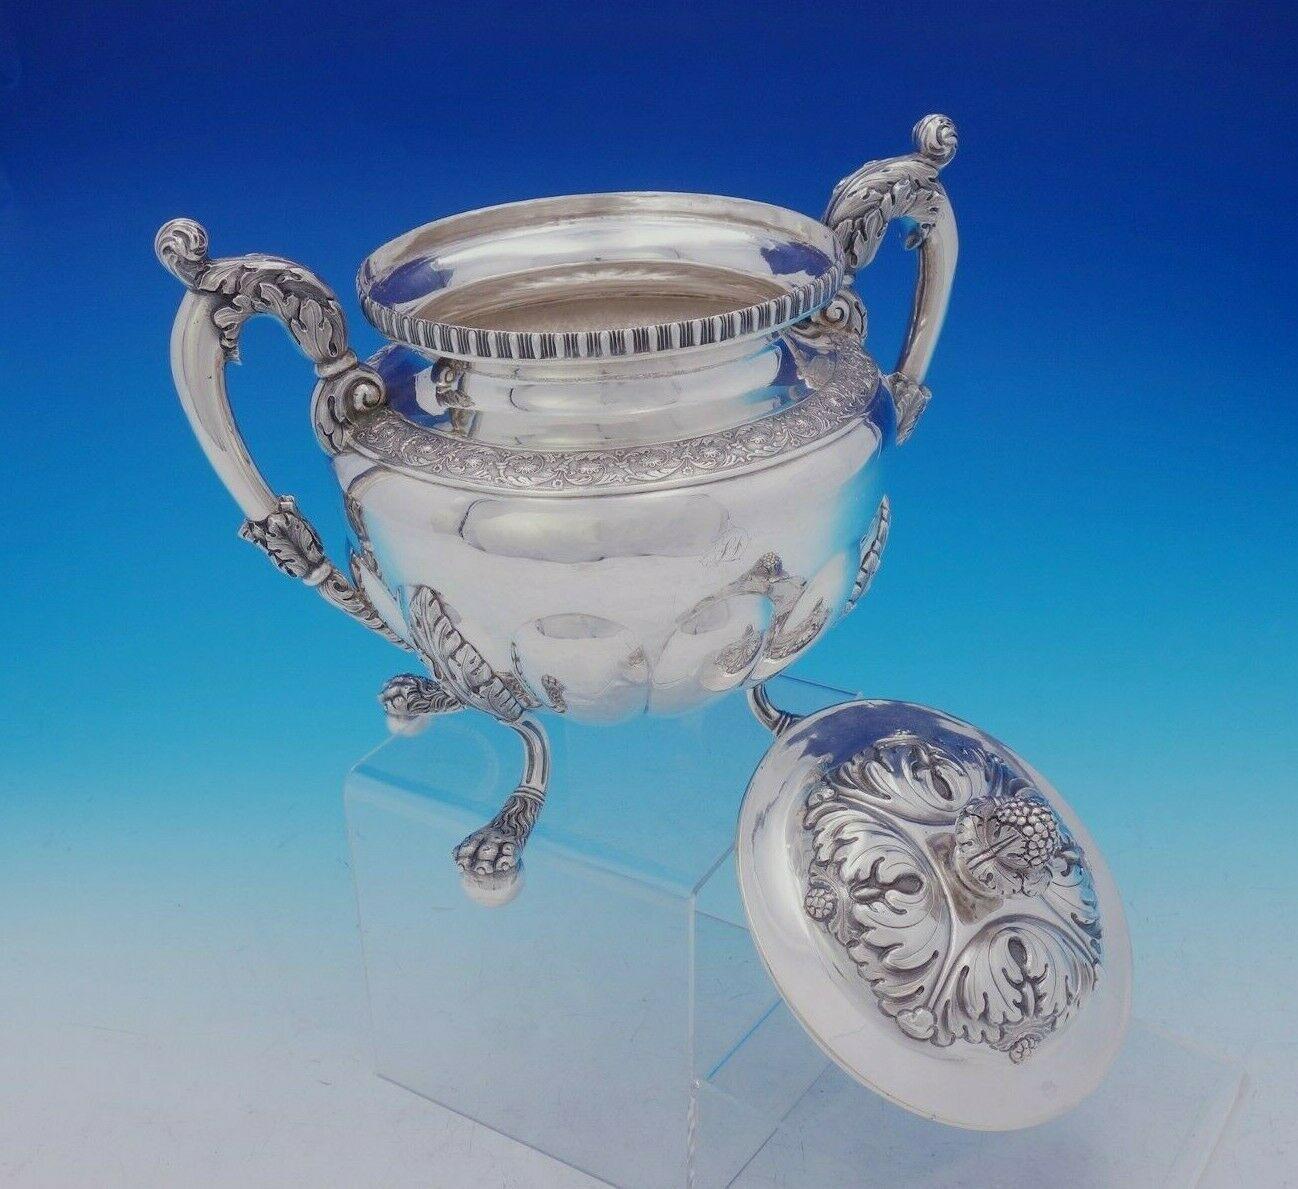 William Thomson Coin Silver Tea Set 4pc with Floral and Acanthus Leaf Motif 4